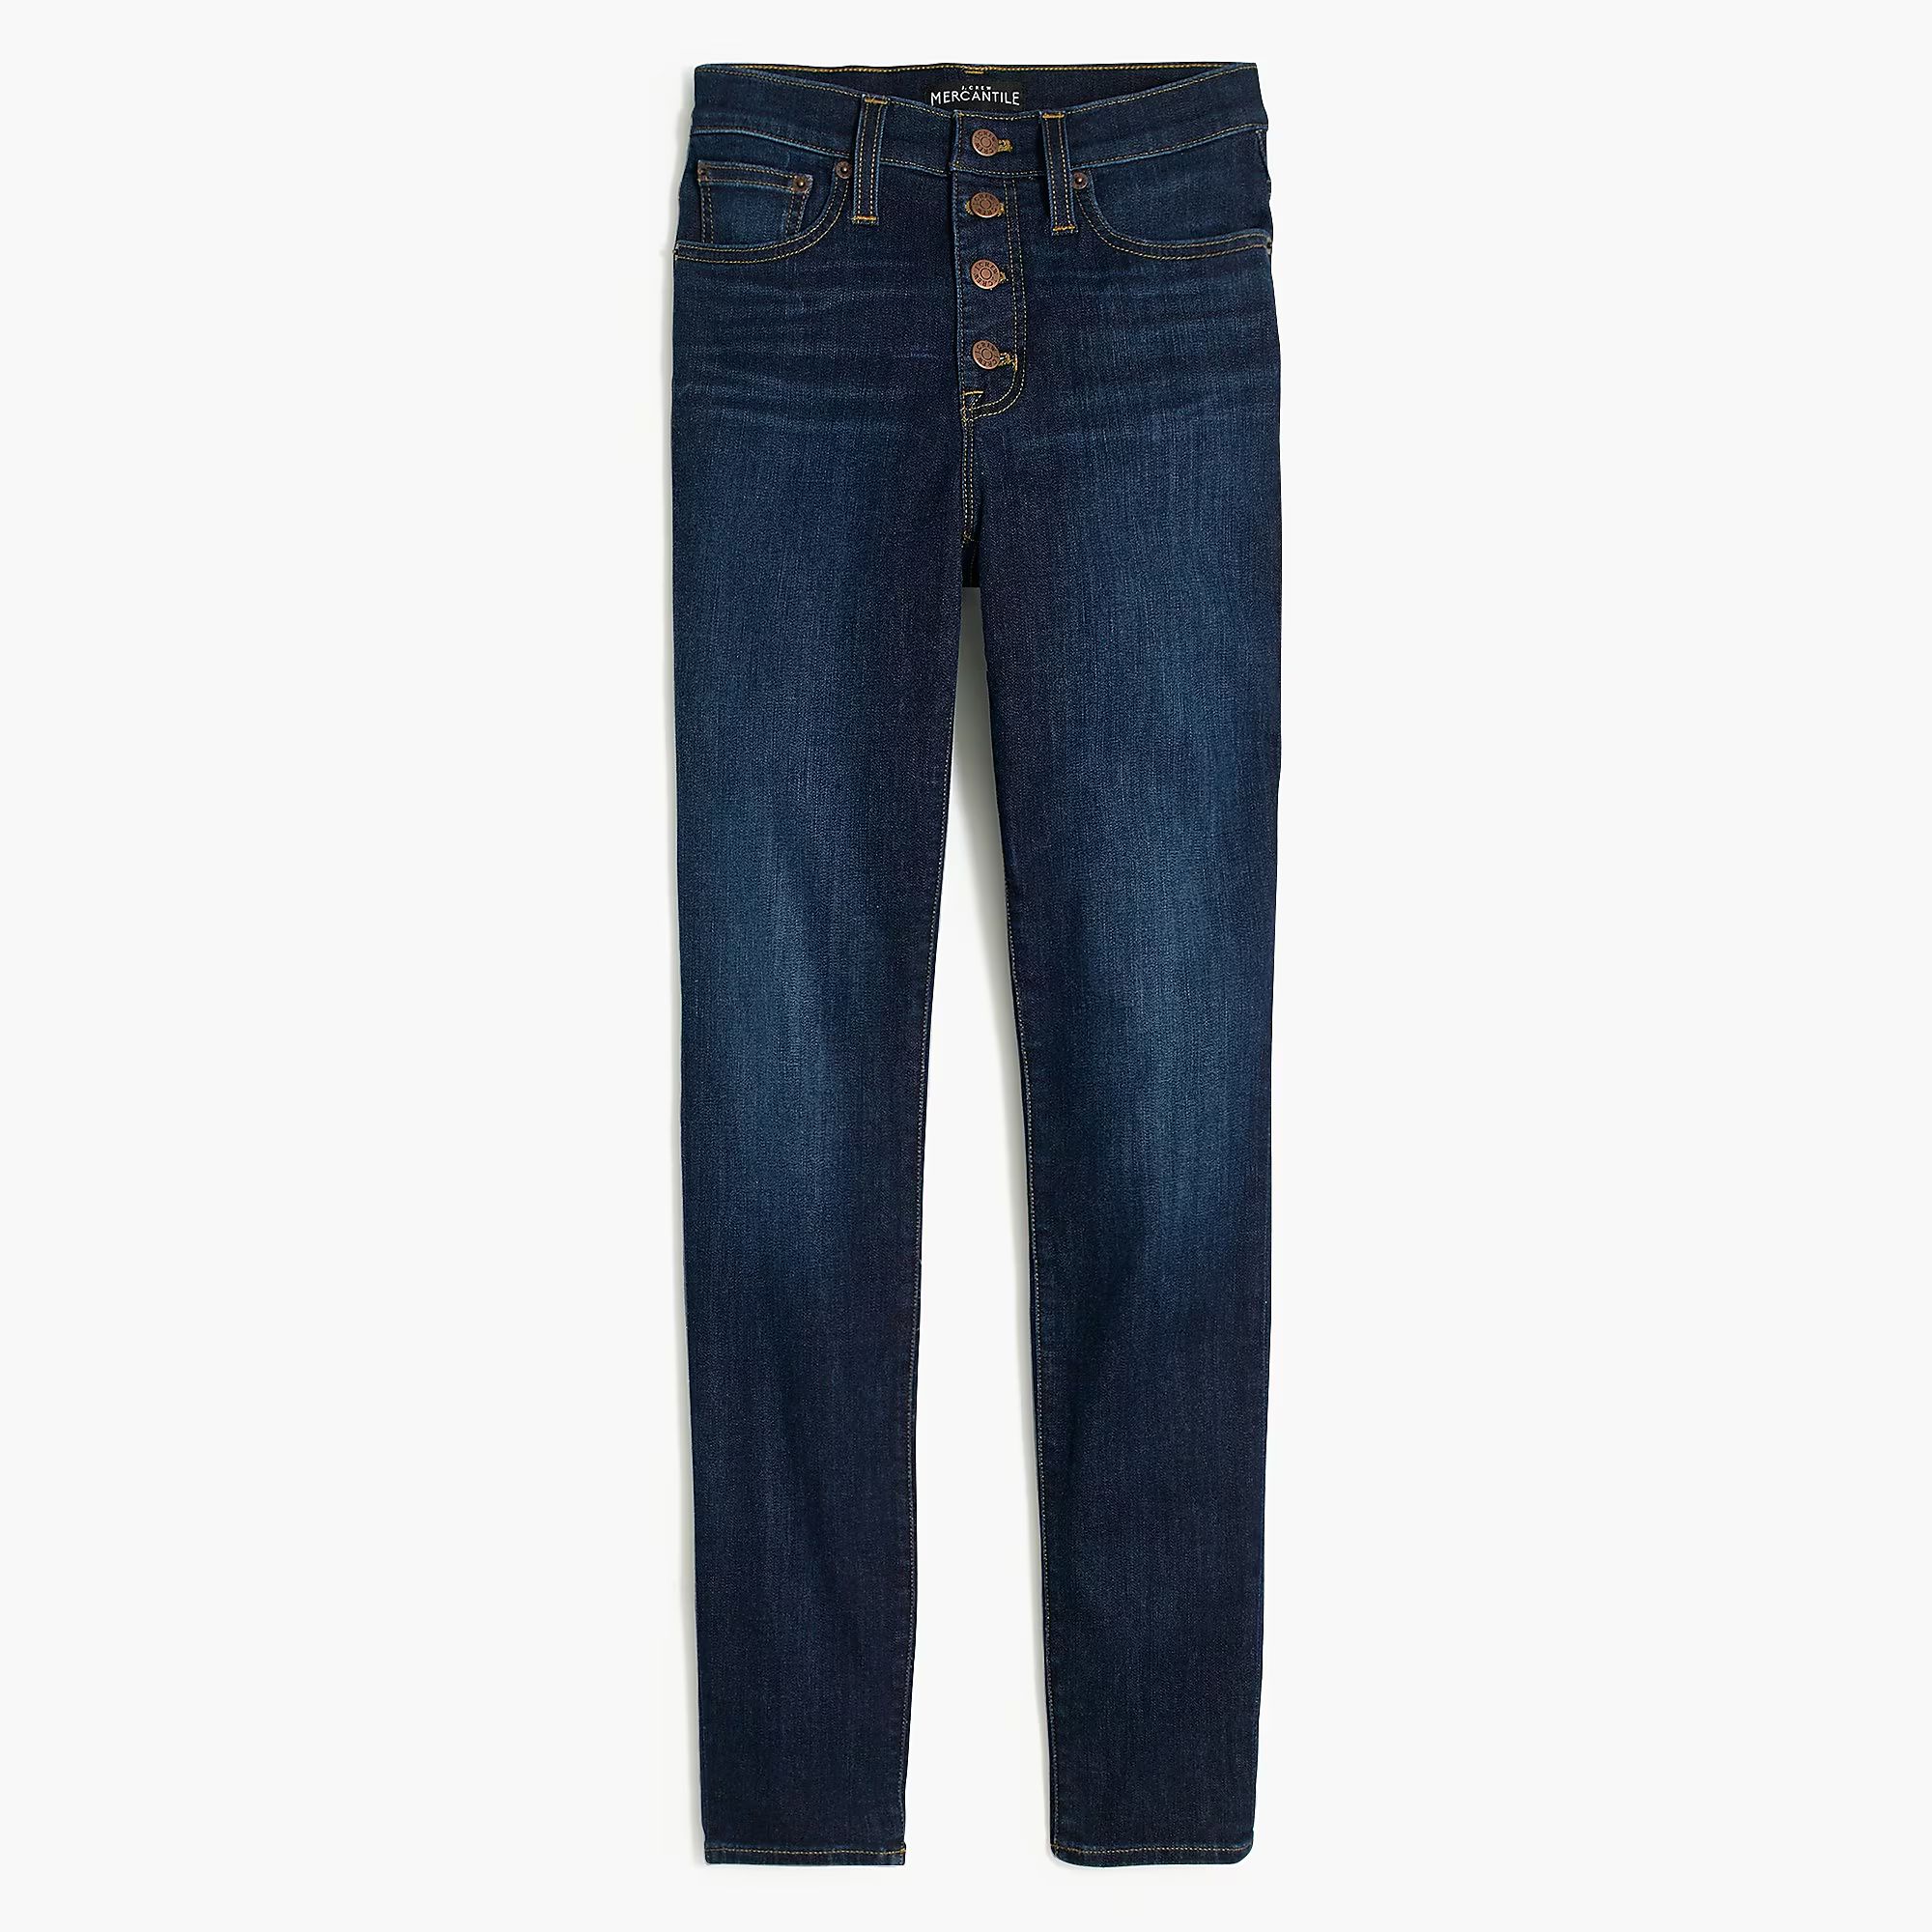 9" high-rise skinny jean with button fly in dark wash | J.Crew Factory